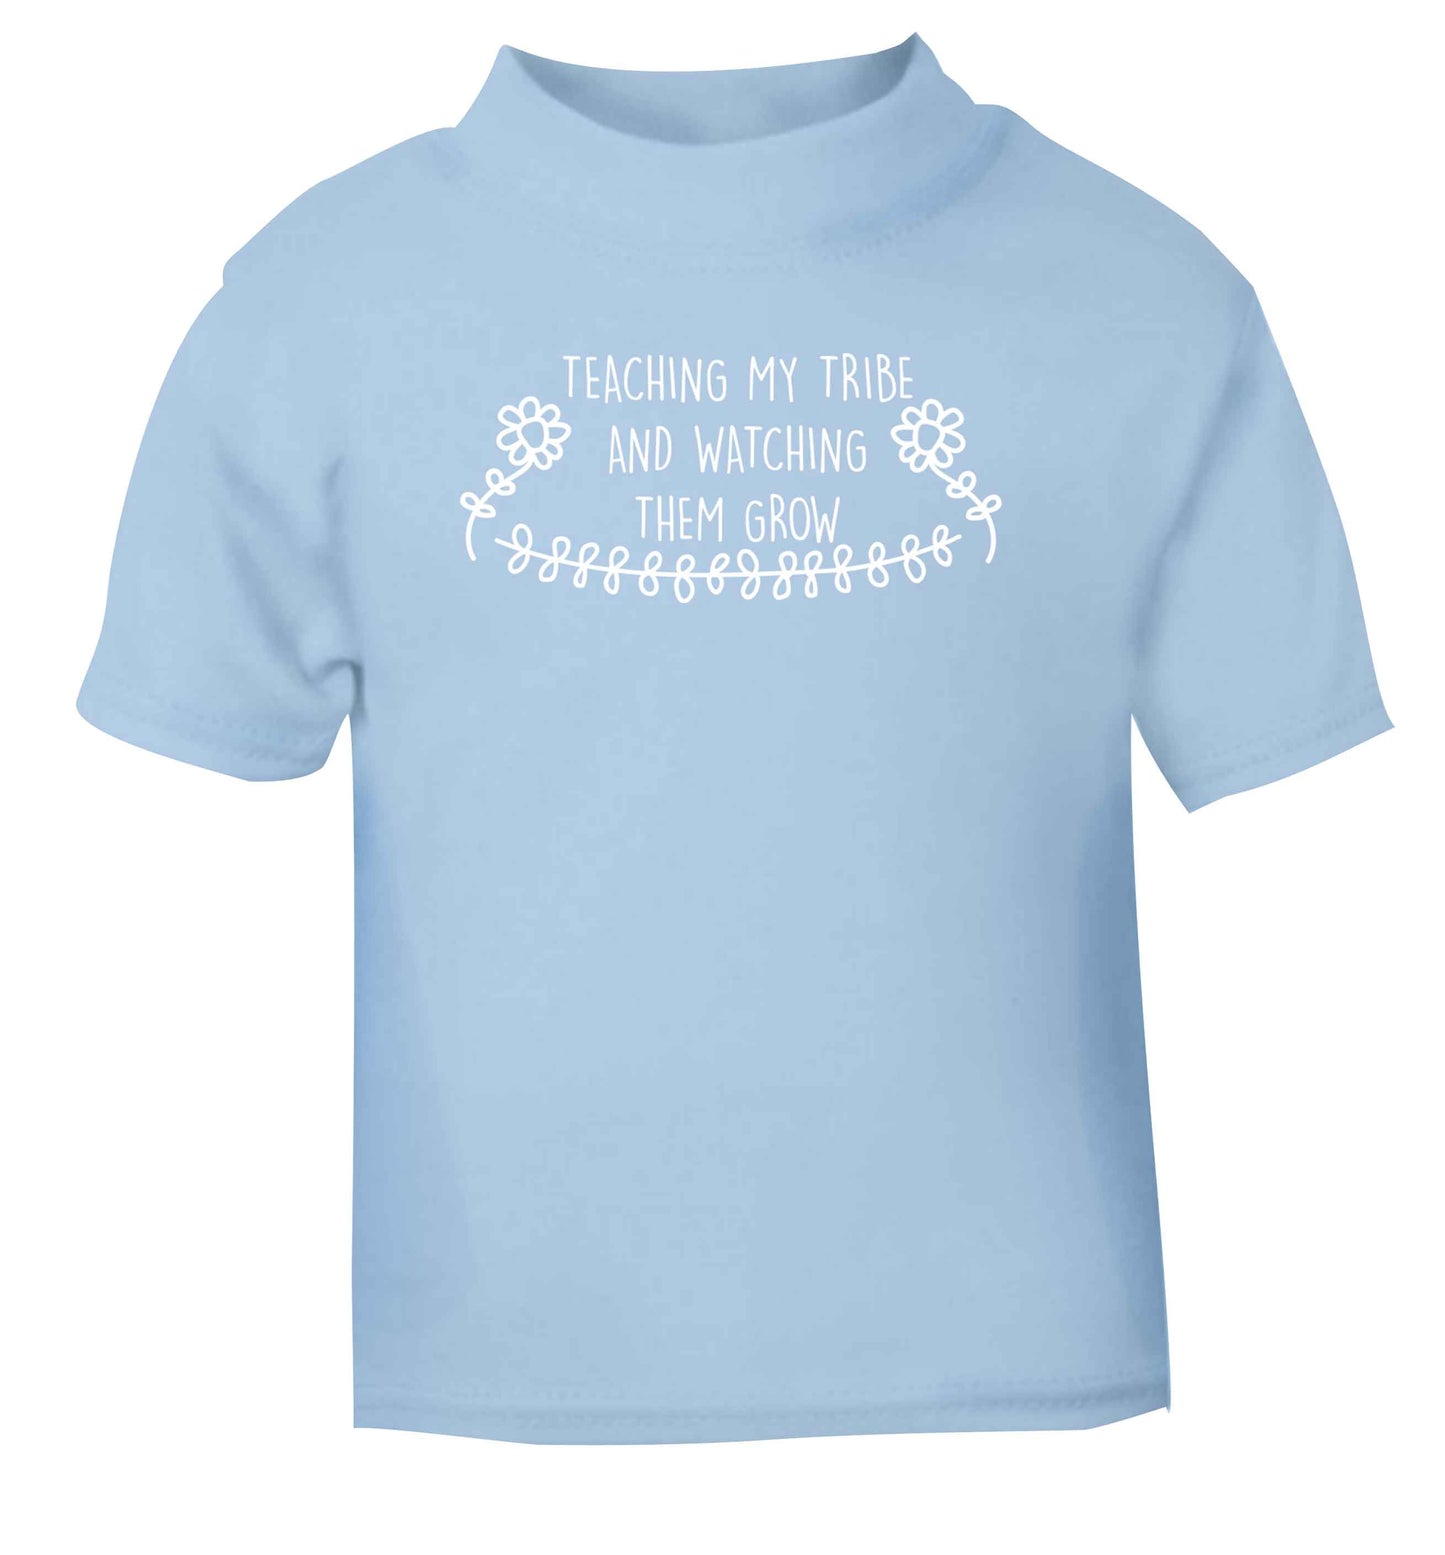 Teaching my tribe and watching them grow light blue Baby Toddler Tshirt 2 Years